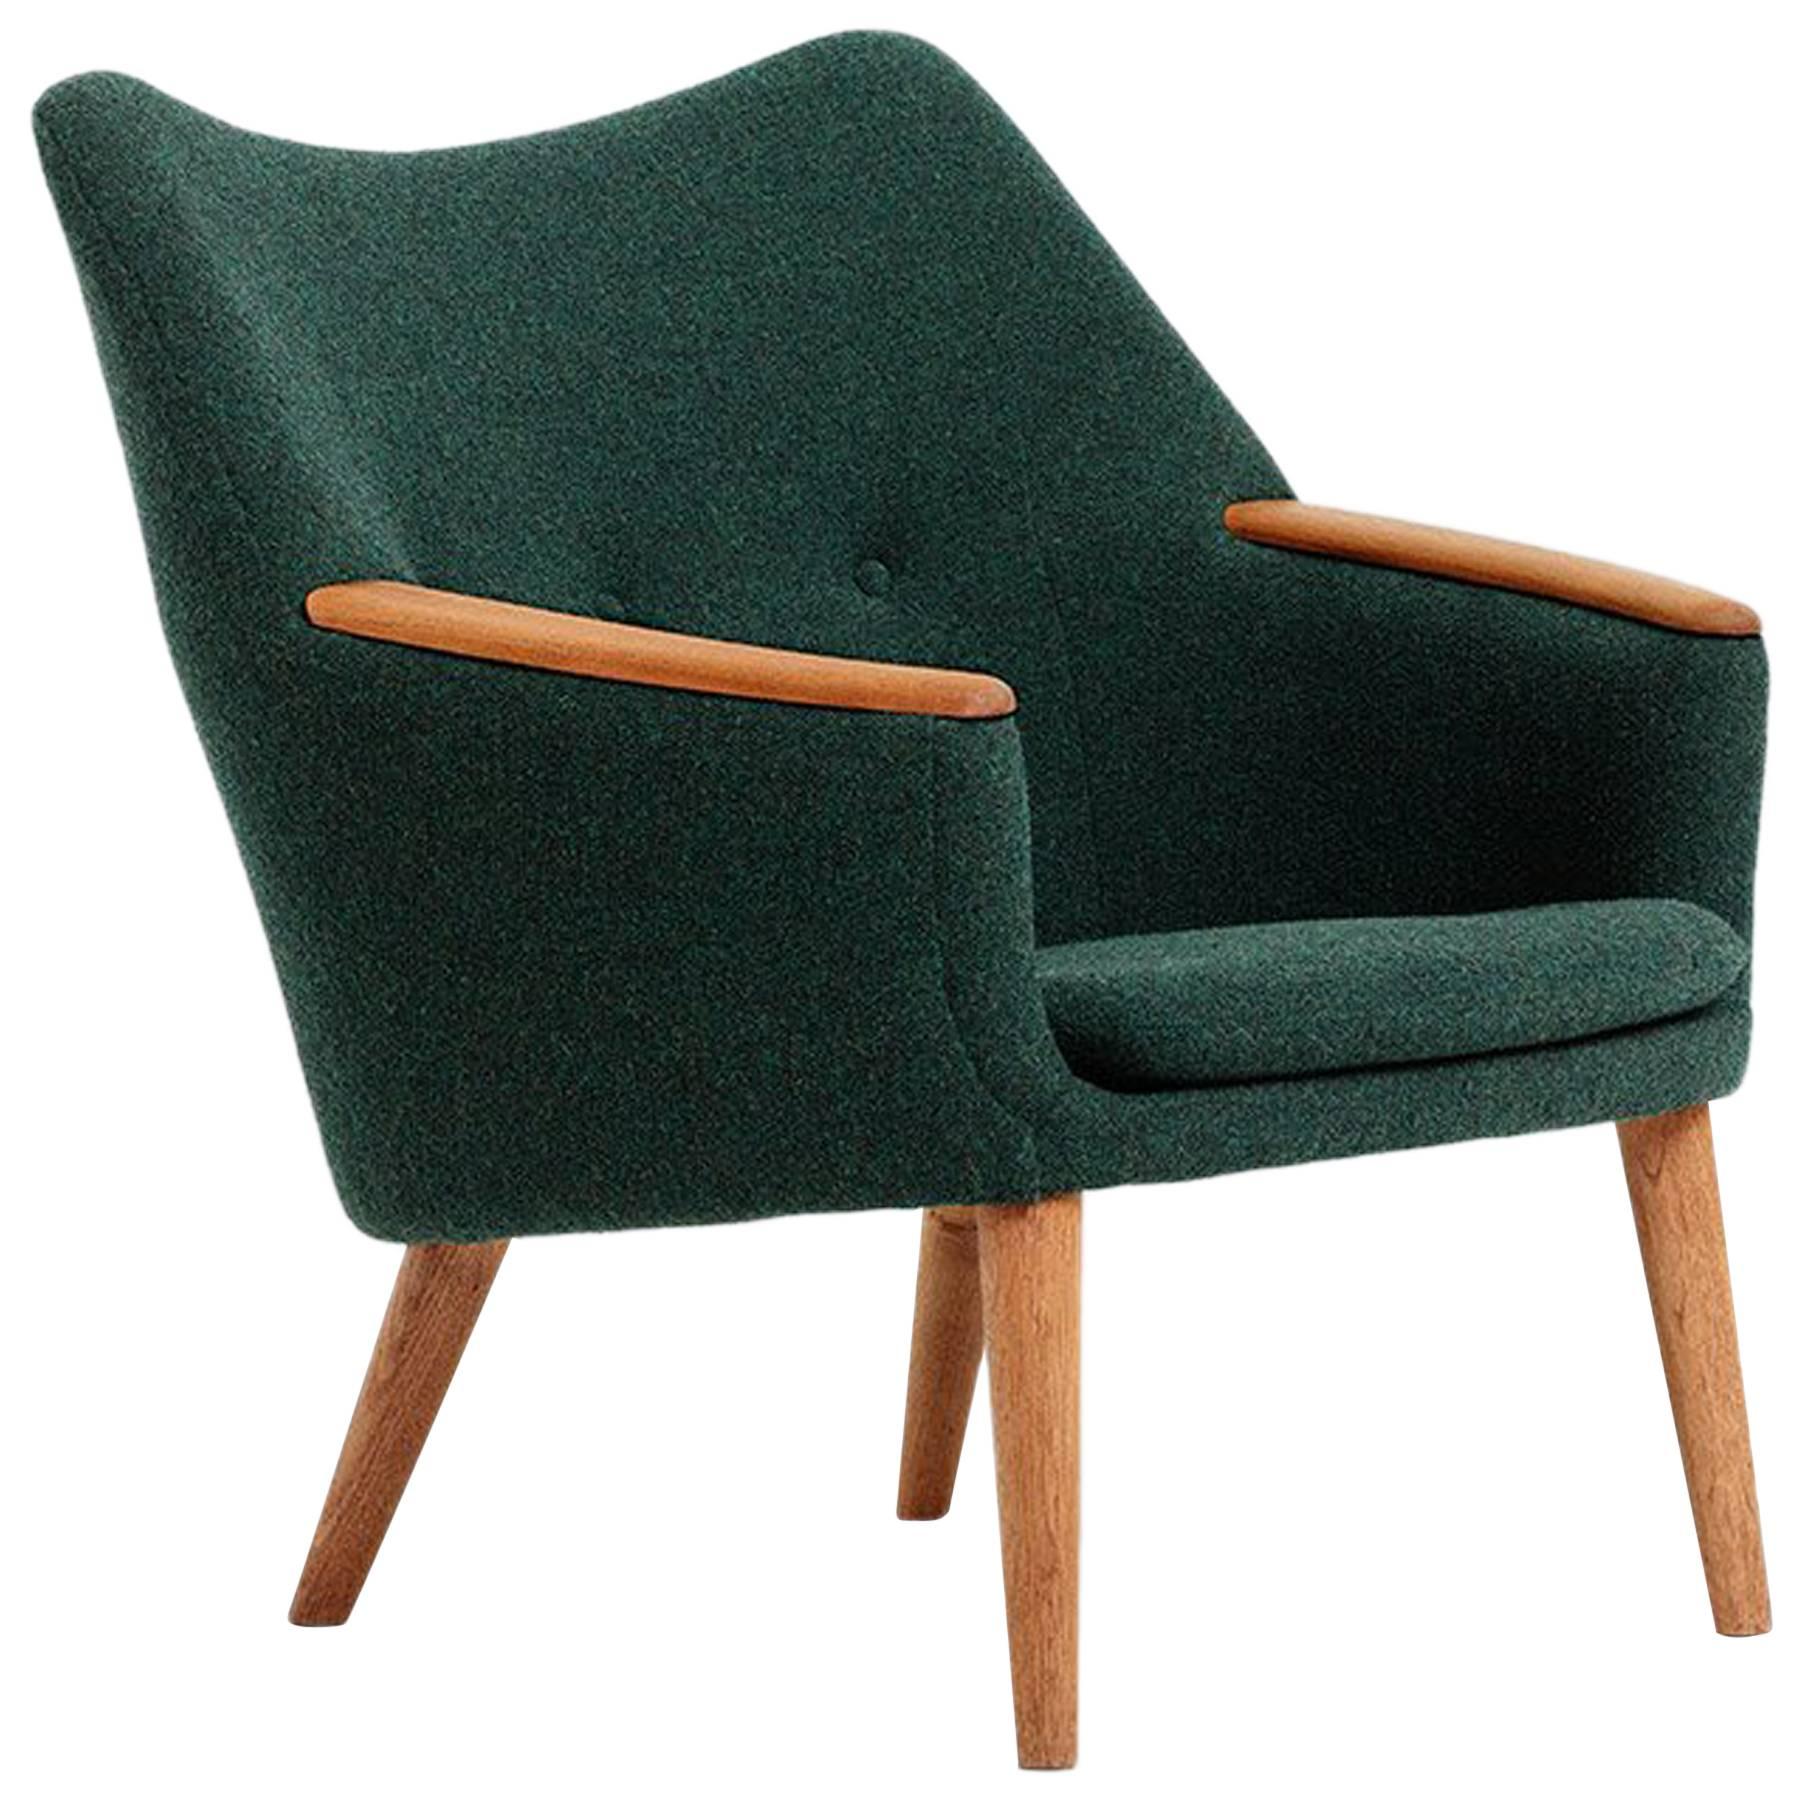 Pair of Lounge Chairs Designed by Kurt Østervig, 1958, Green Wool Upholstery For Sale